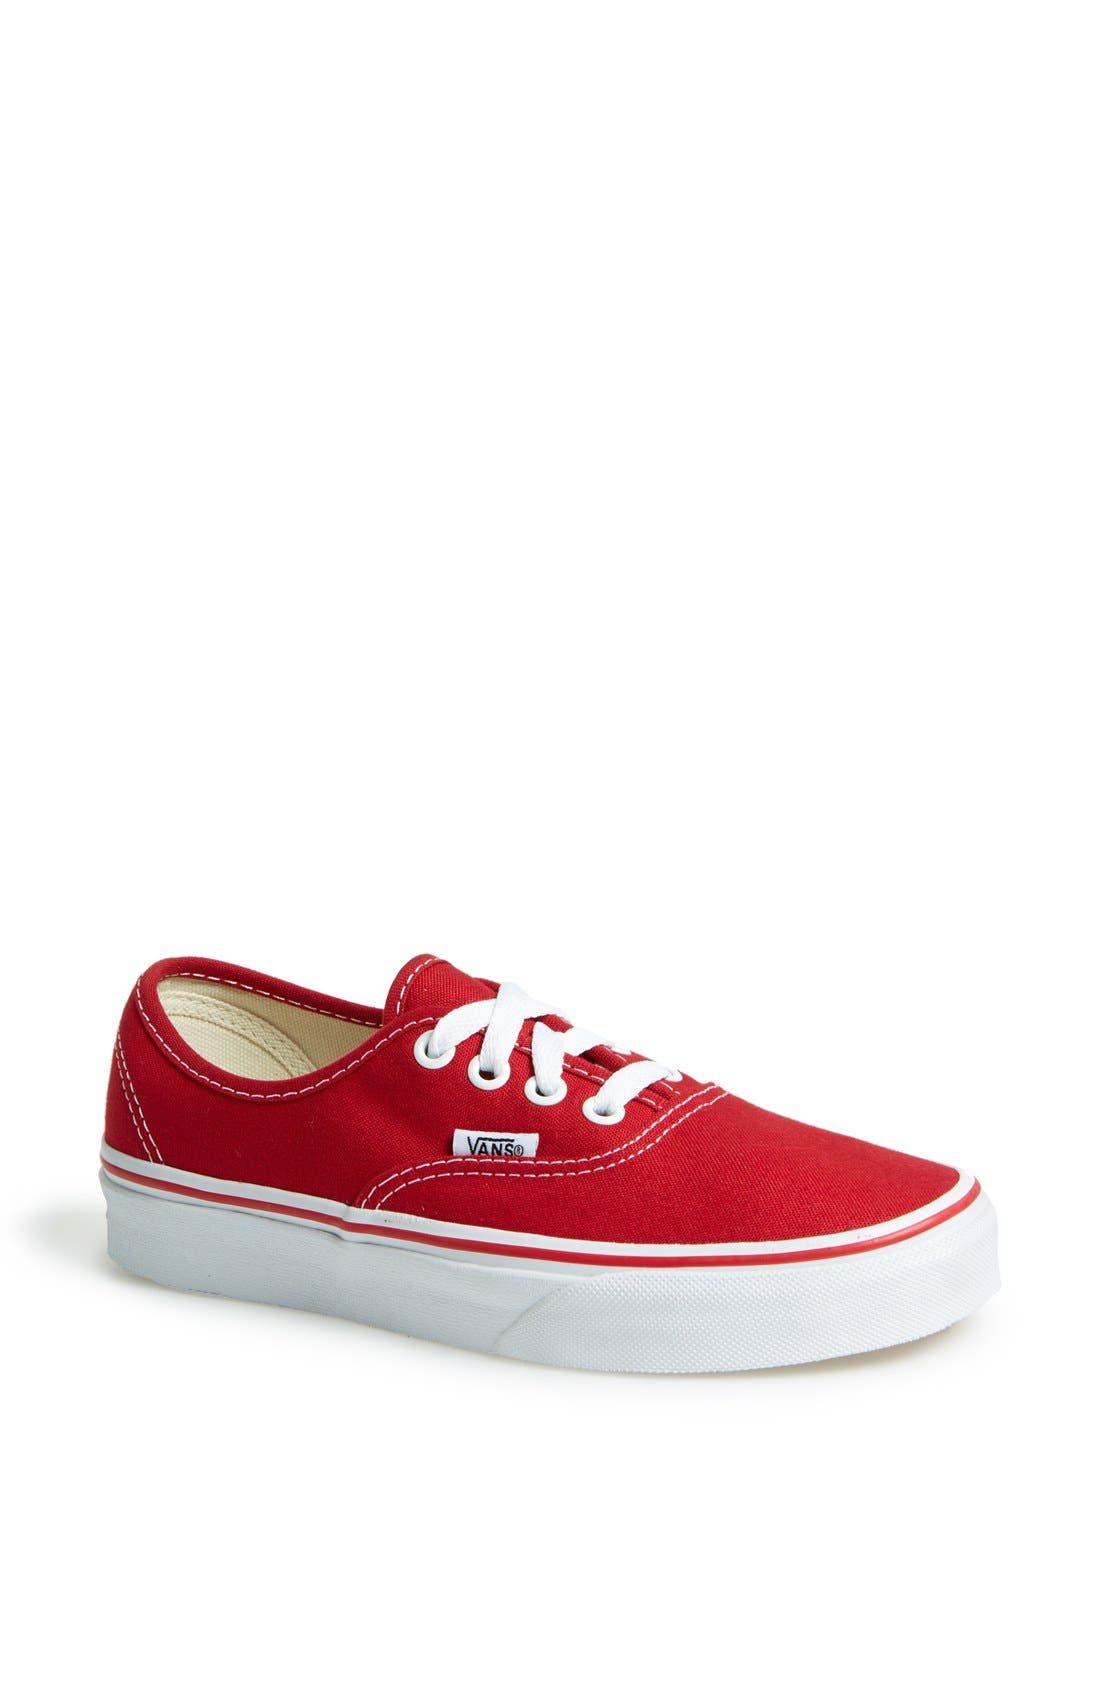 red vans womens size 9